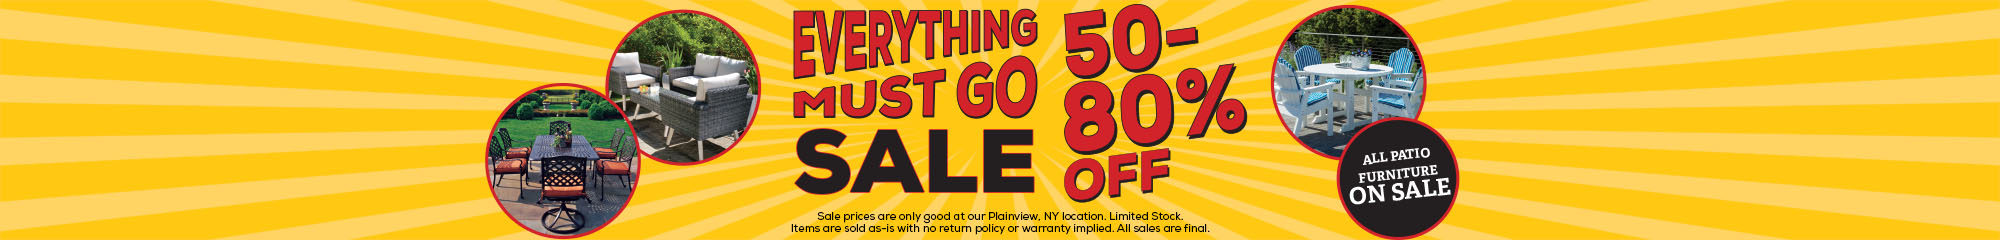 All Patio Must Go! Save 50-80% OFF